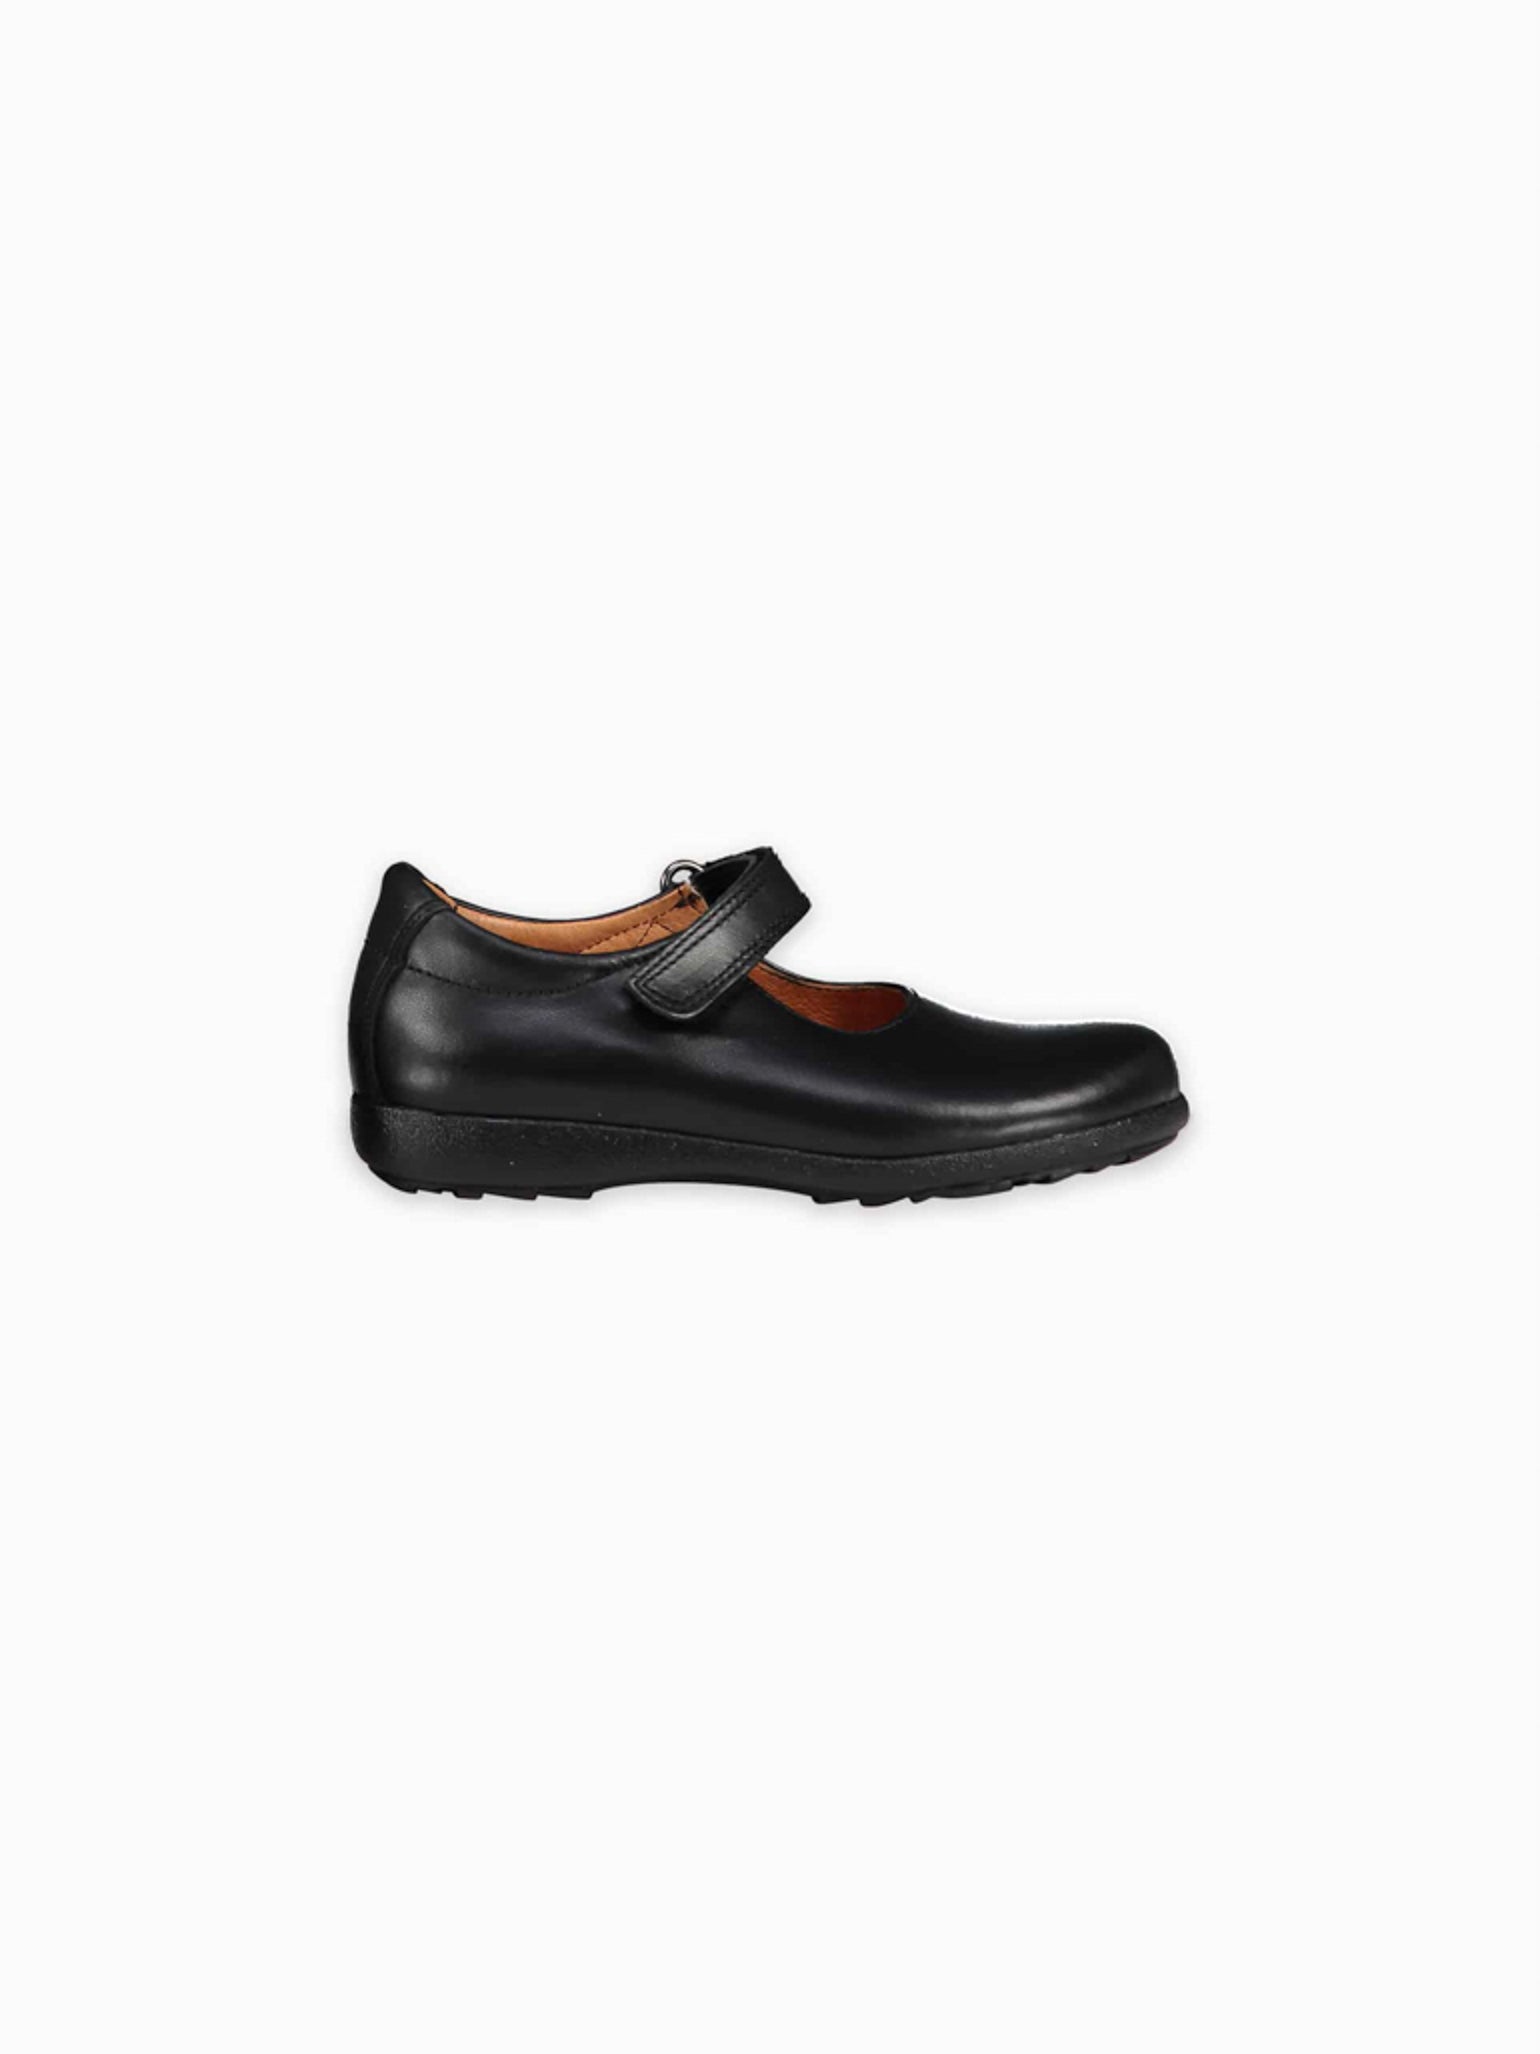 Black Leather Girl Classic School Shoes